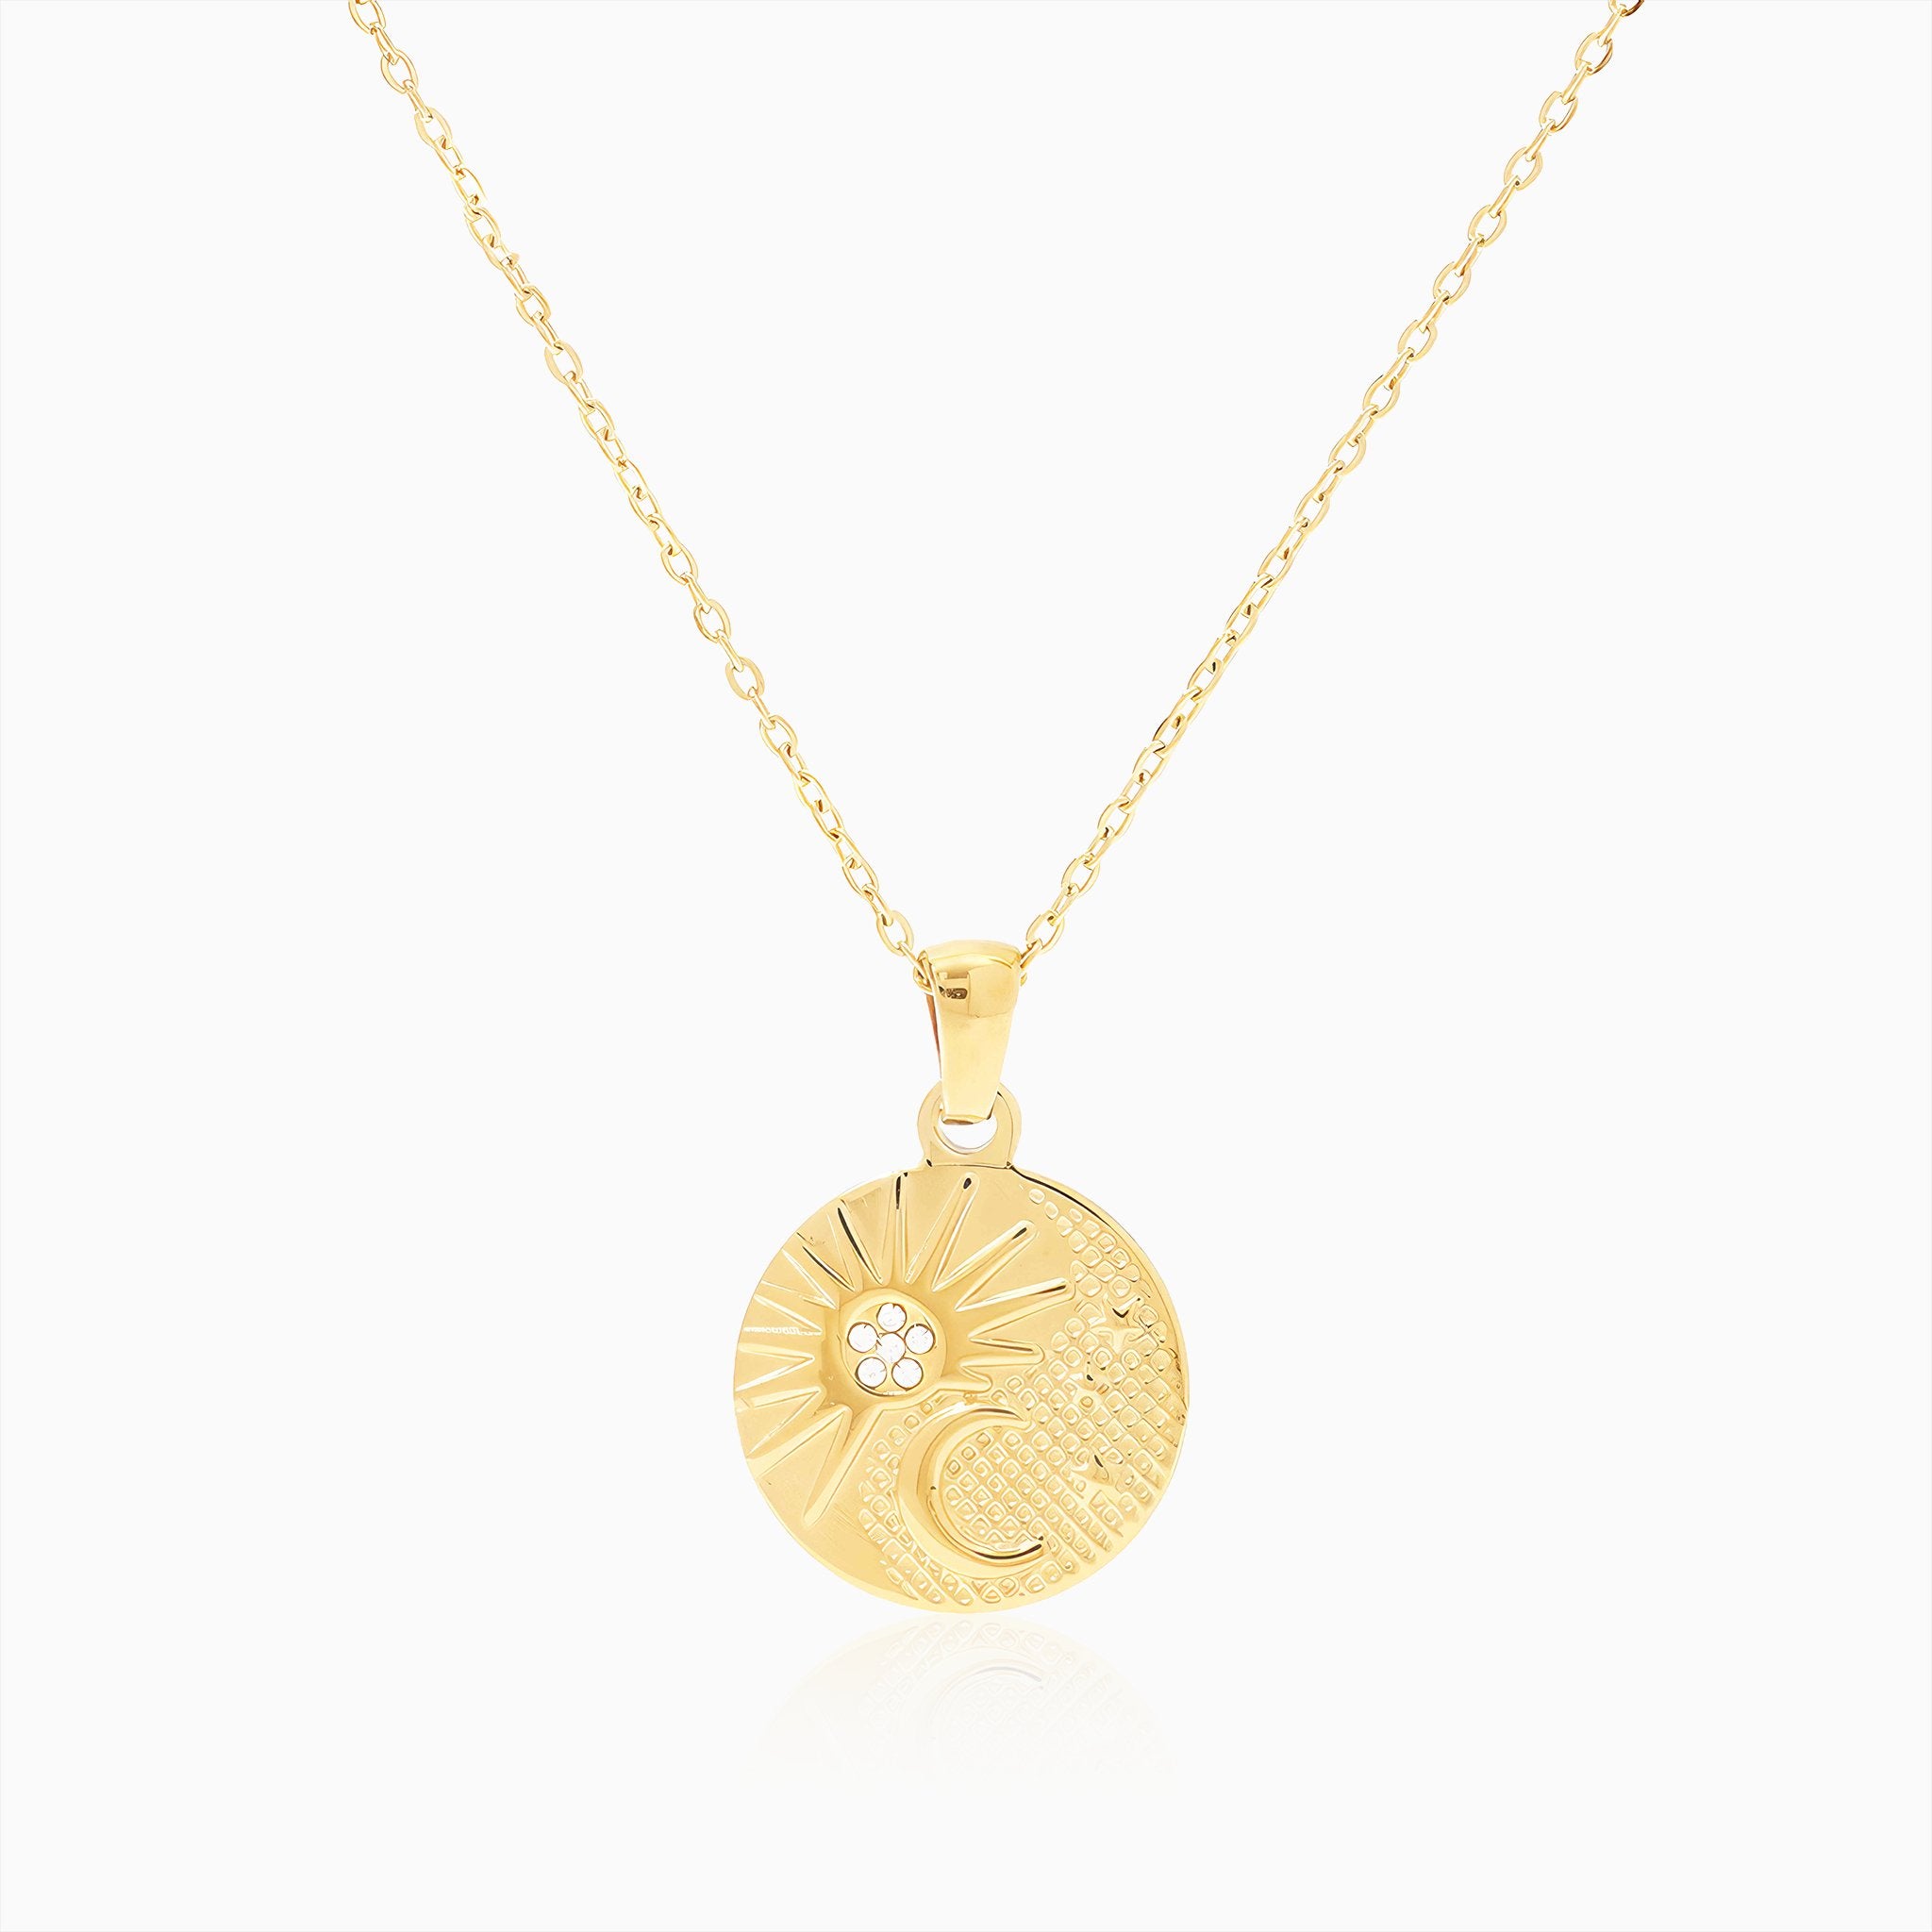 Sun & Half Moon Pendant Necklace - Nobbier - Necklace - 18K Gold And Titanium PVD Coated Jewelry